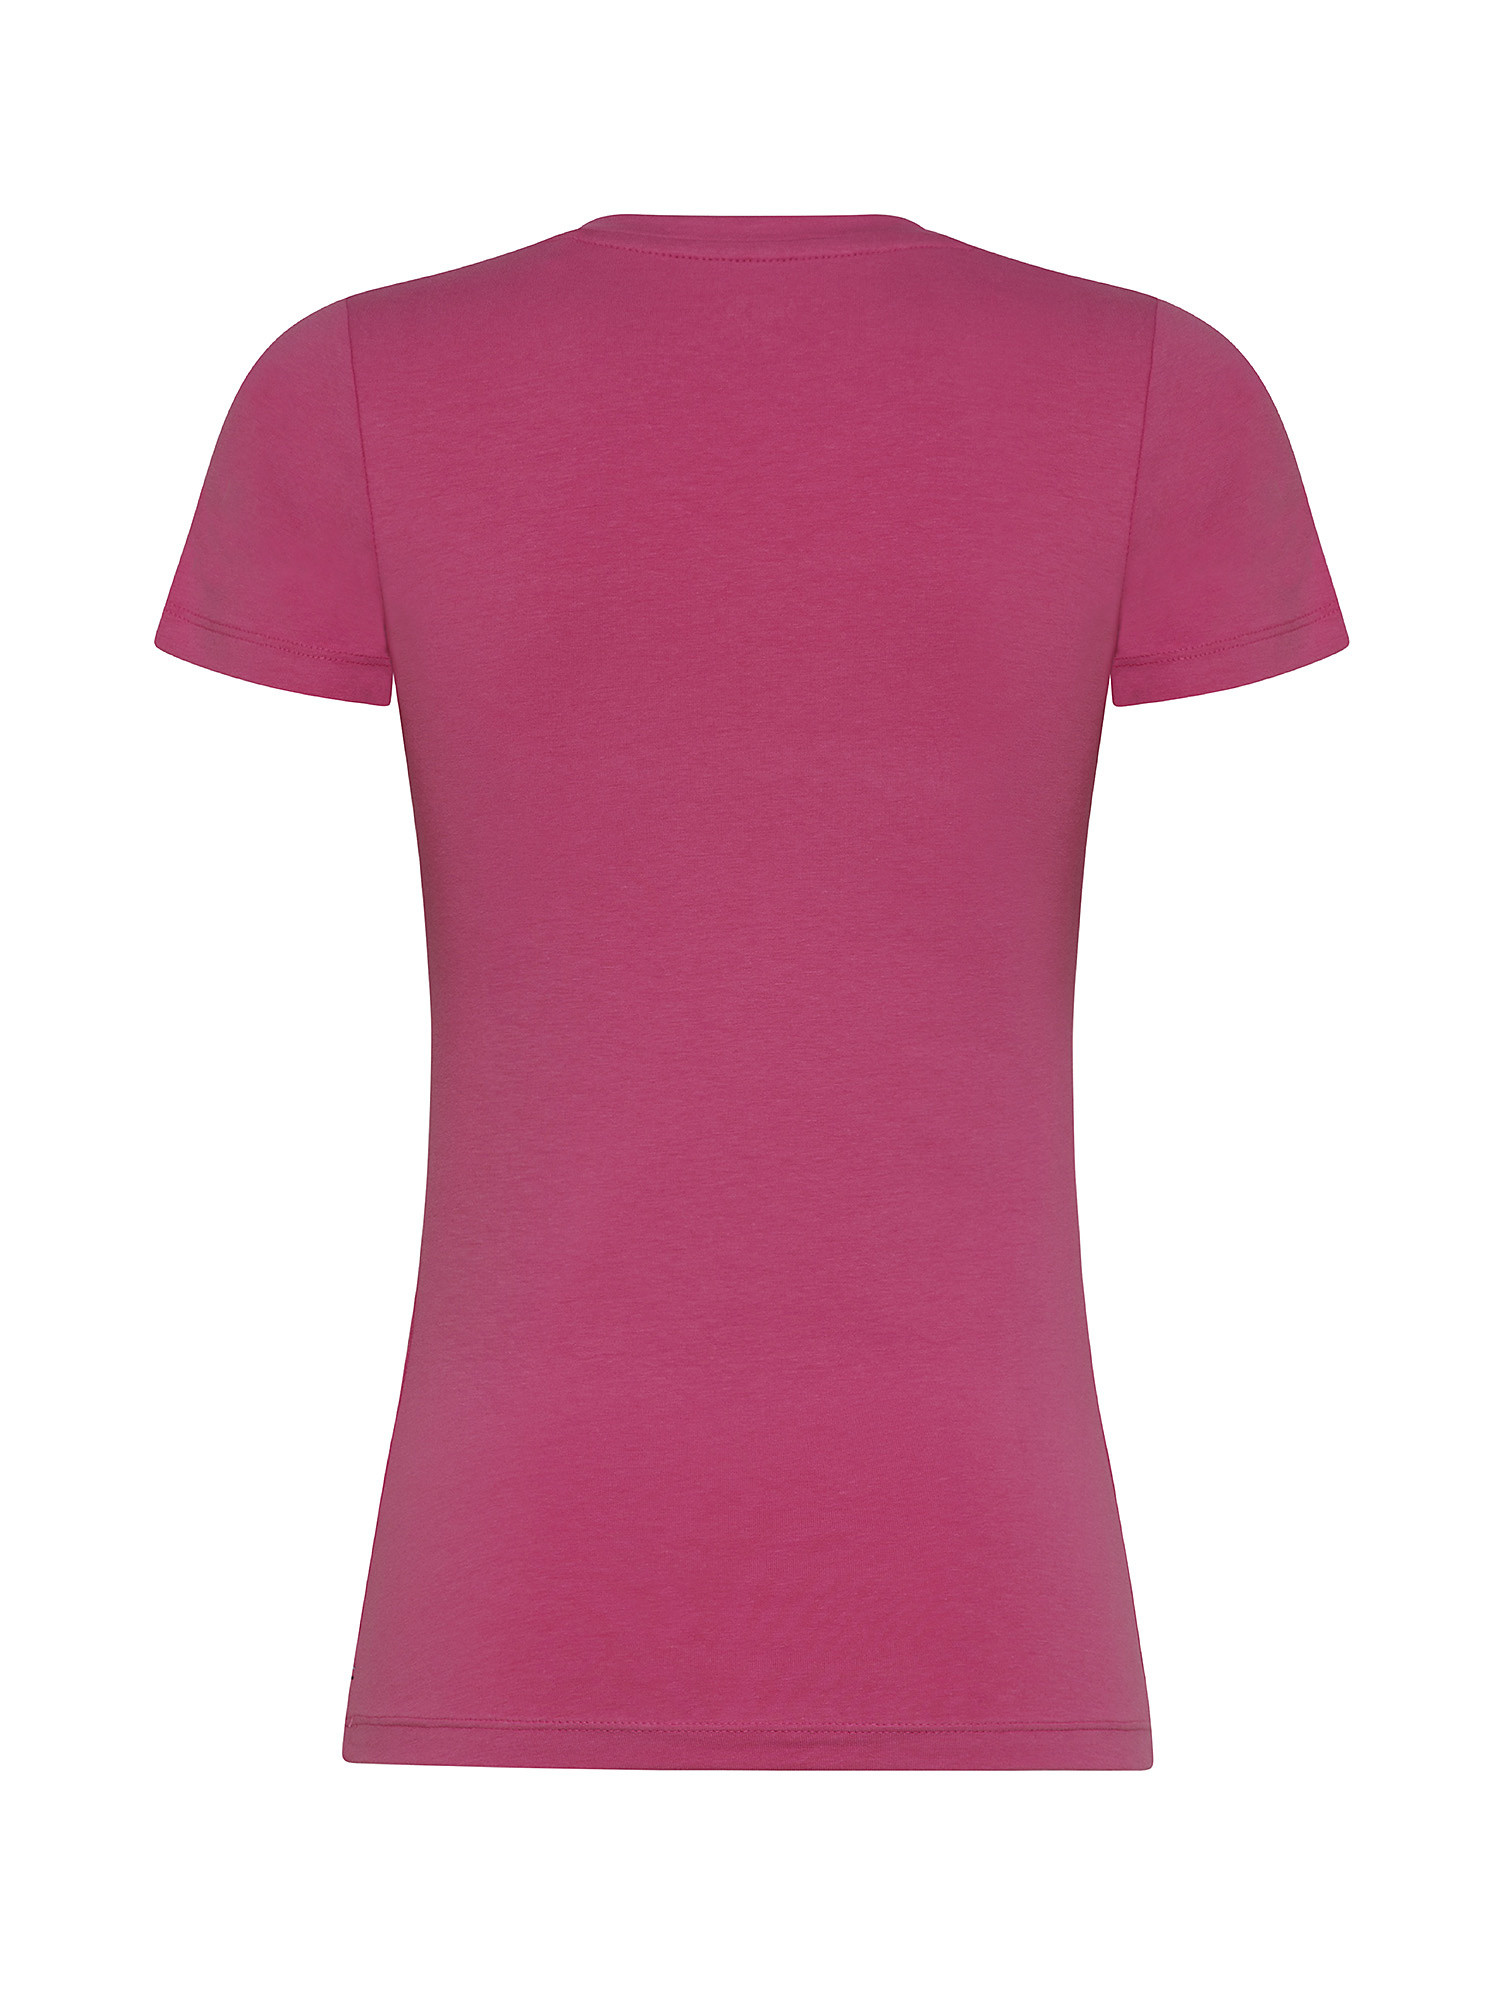 T-shirt Violette in cotone, Rosa fenicottero, large image number 1